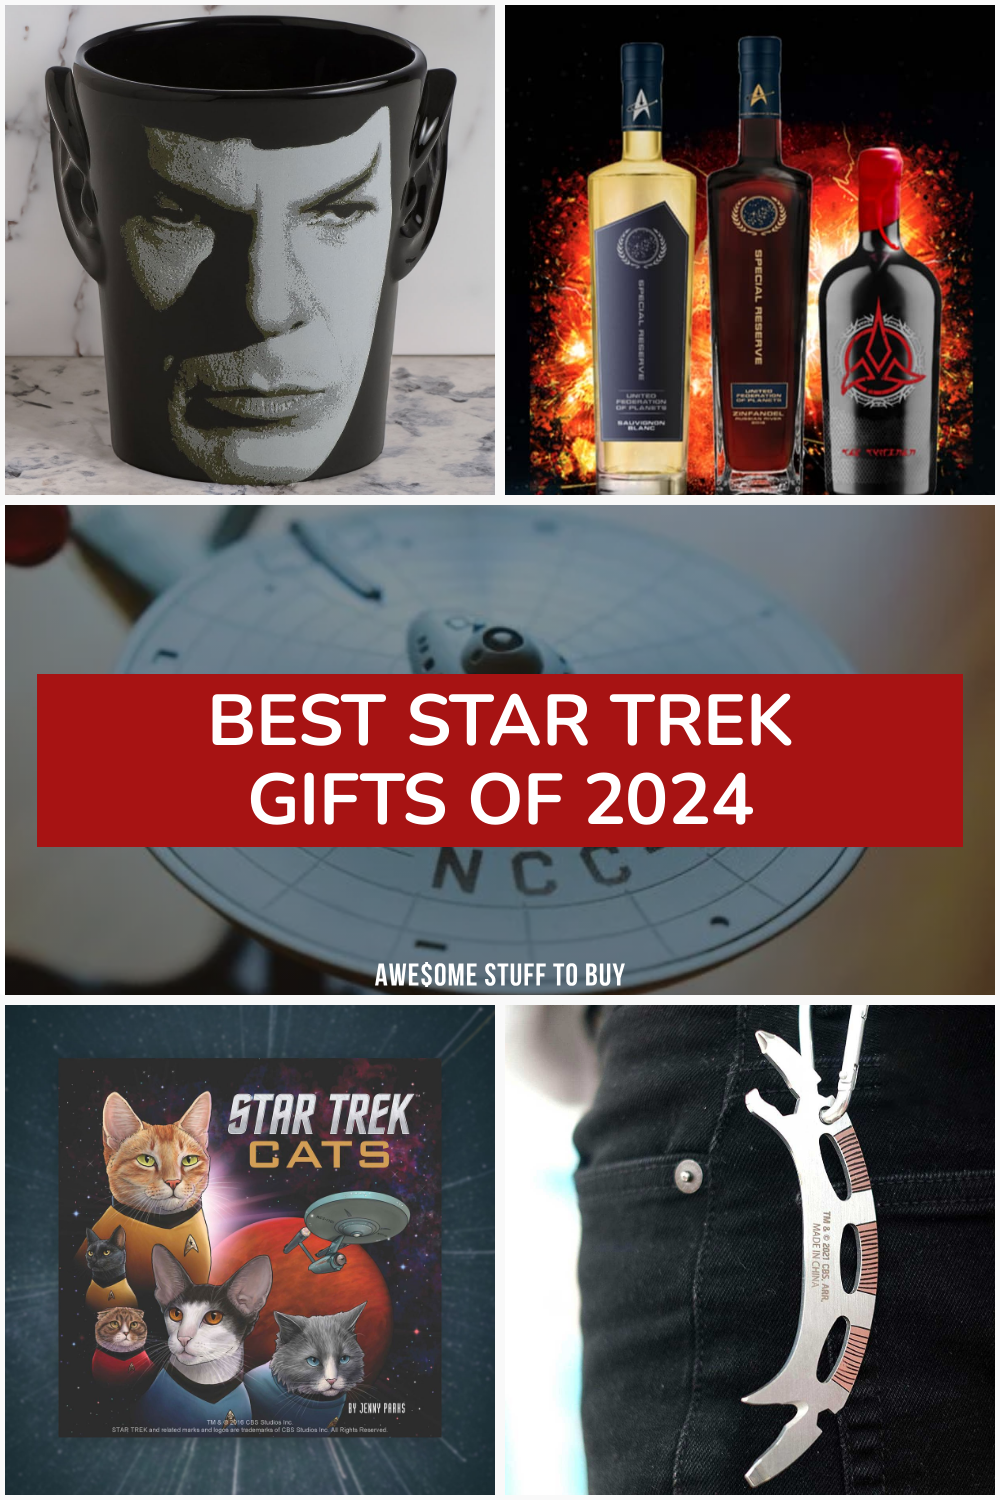 Star Trek Gifts // Awesome Stuff to Buy